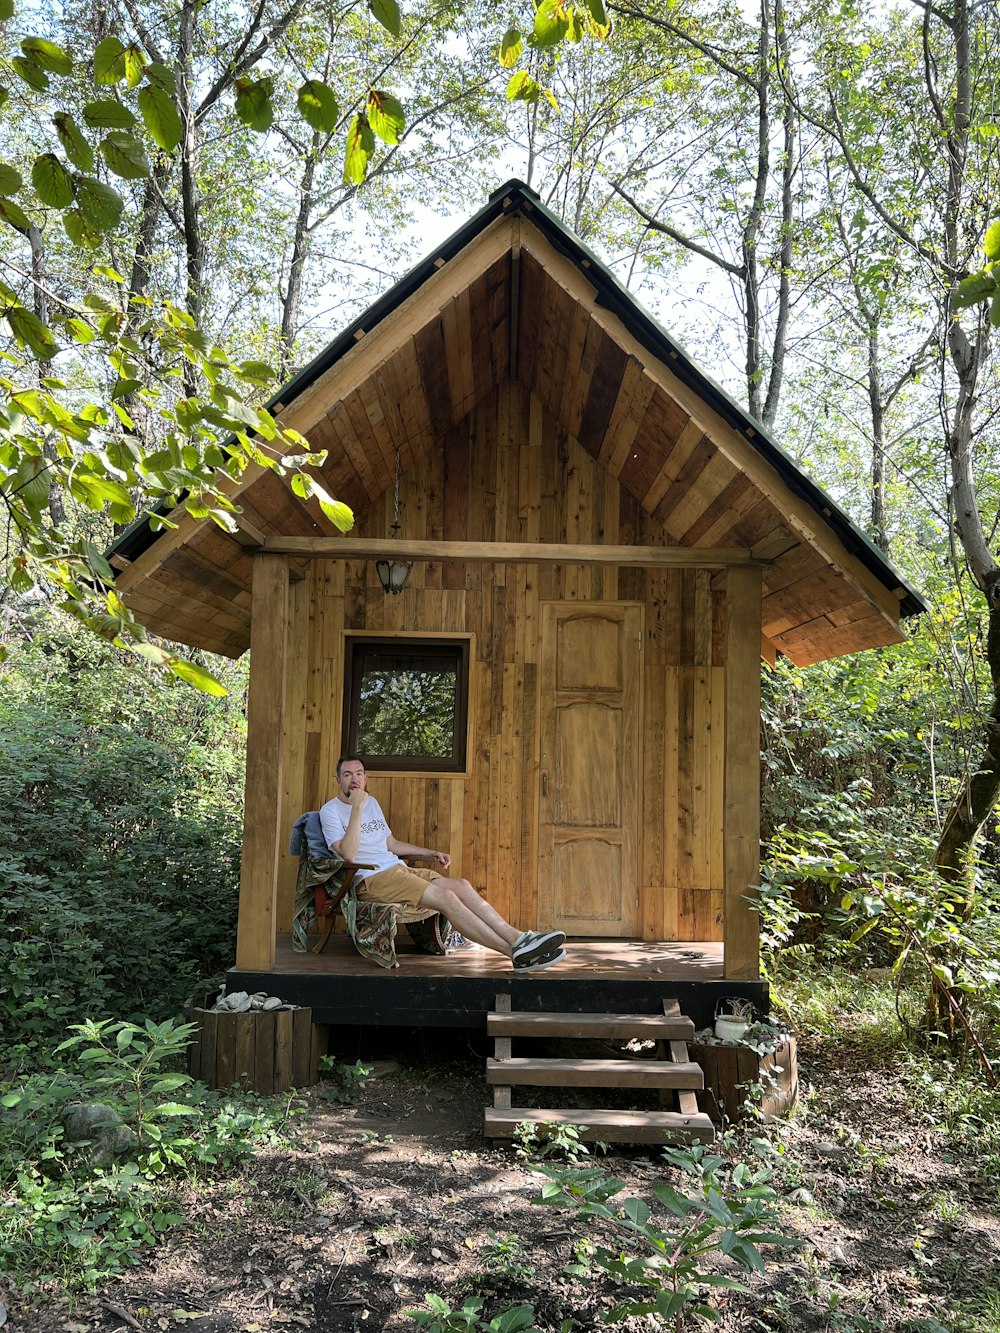 a person sitting in a small wooden house